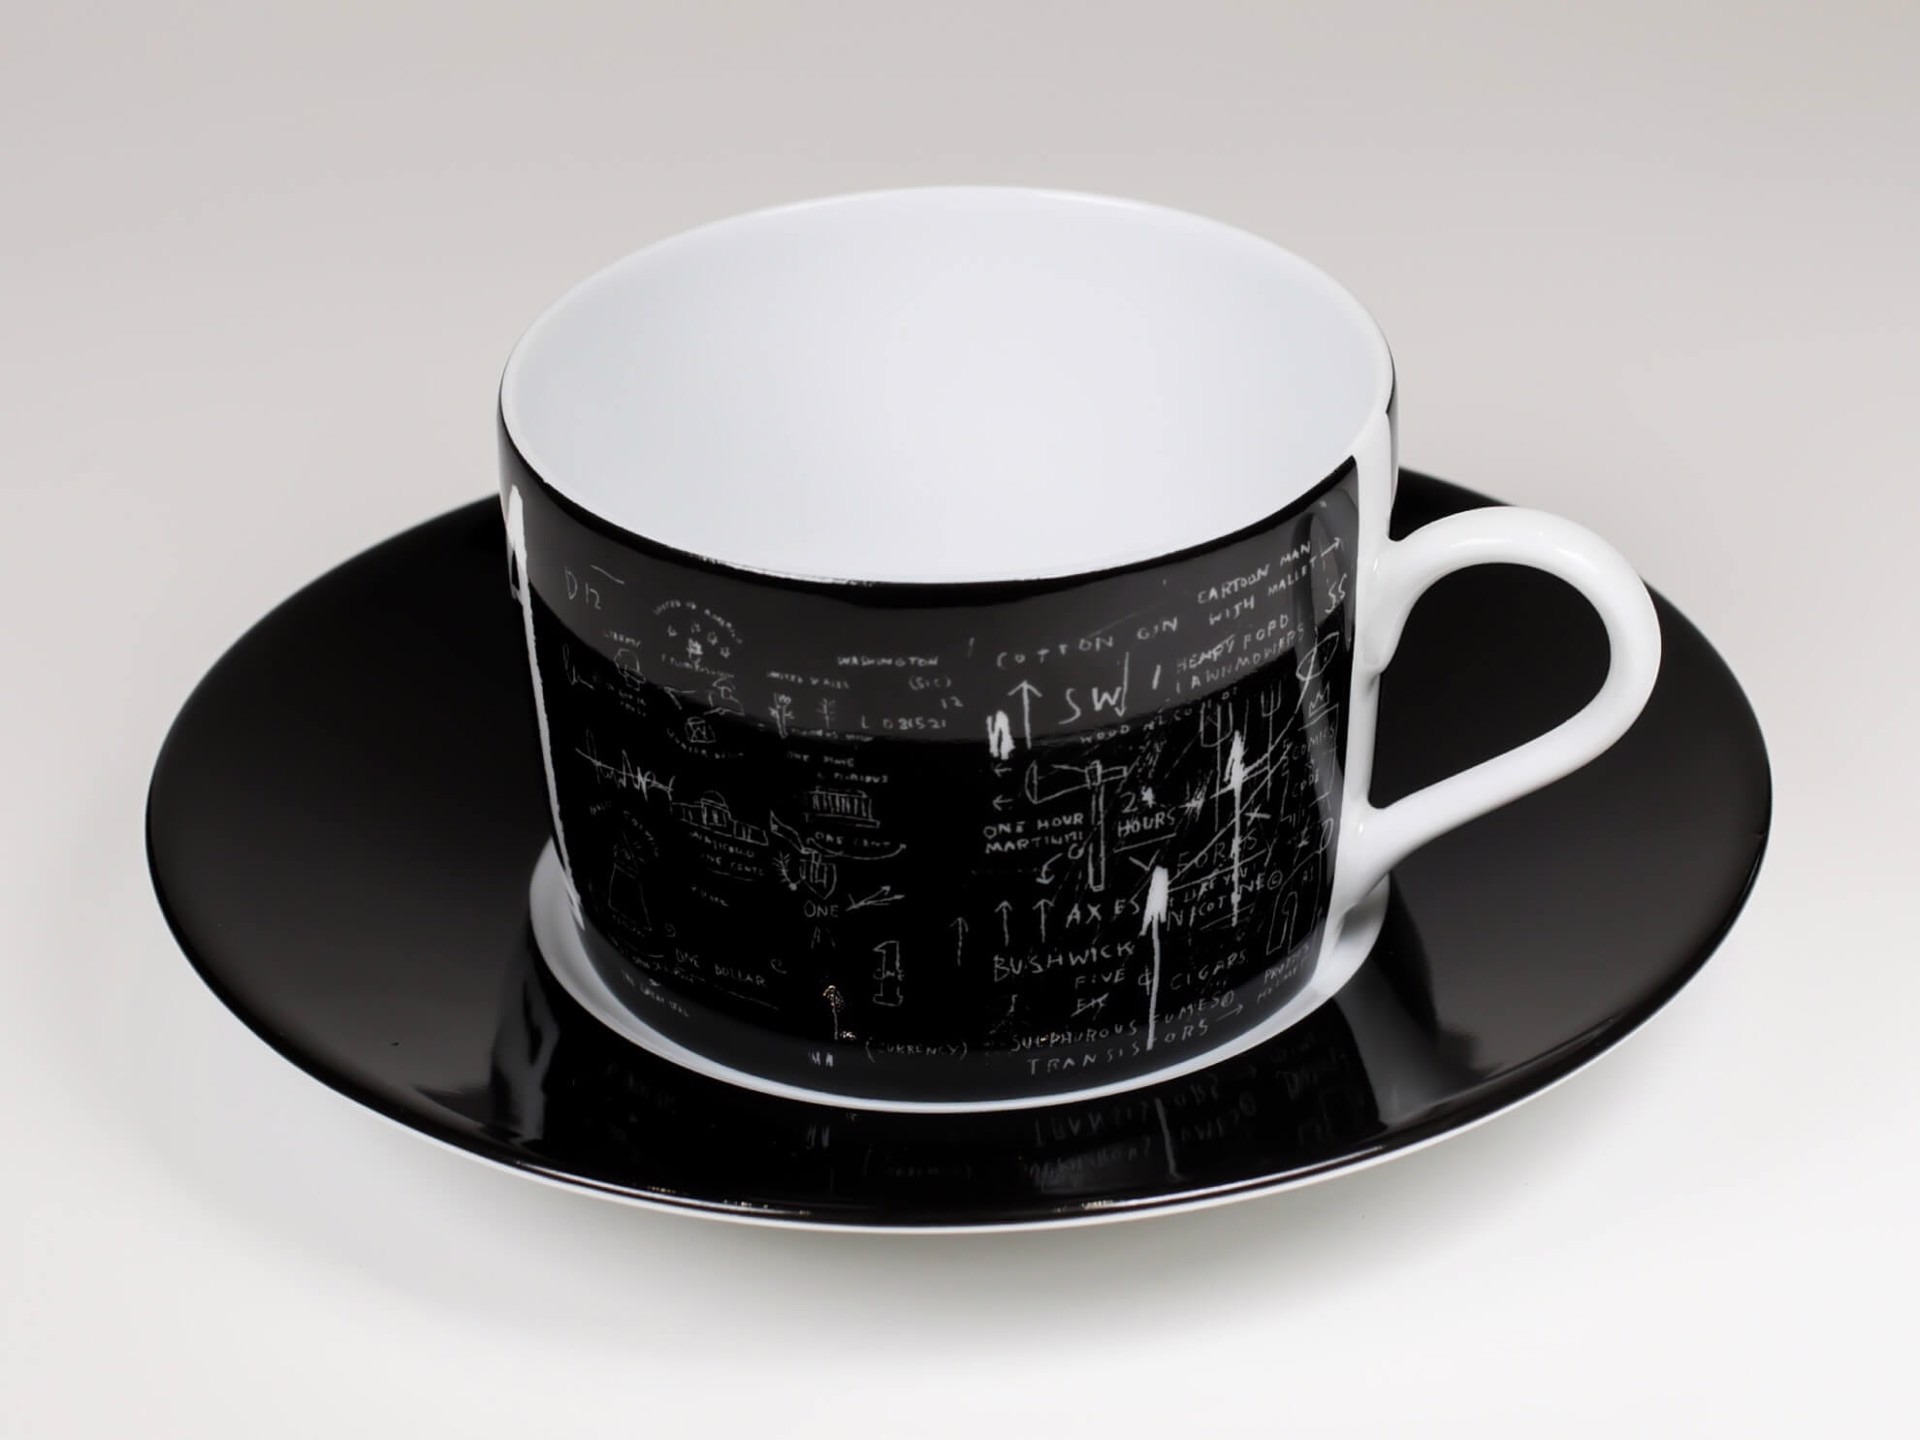 Tuxedo Porcelain Tea Cup and Plate by Jean-Michel Basquiat